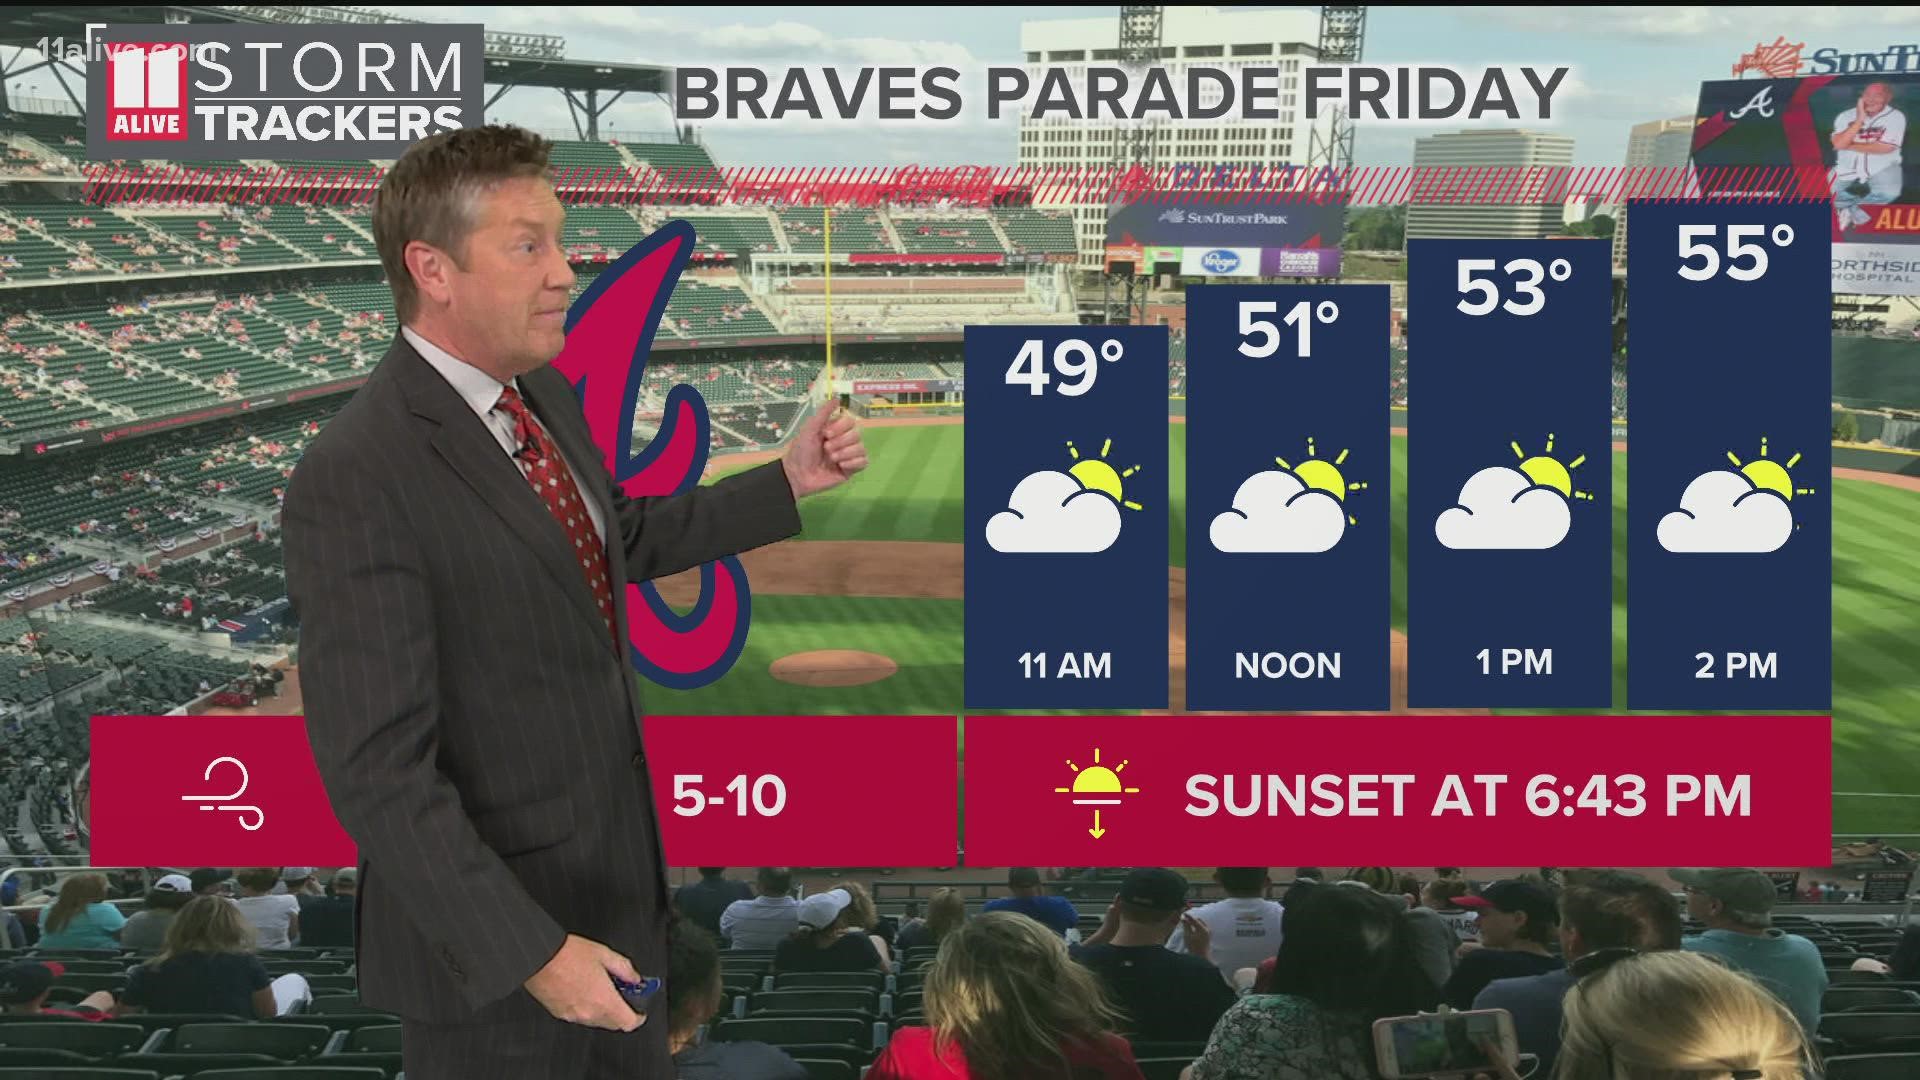 A parade will be held in the Atlanta Brave's honor on Friday. Here is a breakdown of the weather forecast ahead of the massive World Series championship celebration.